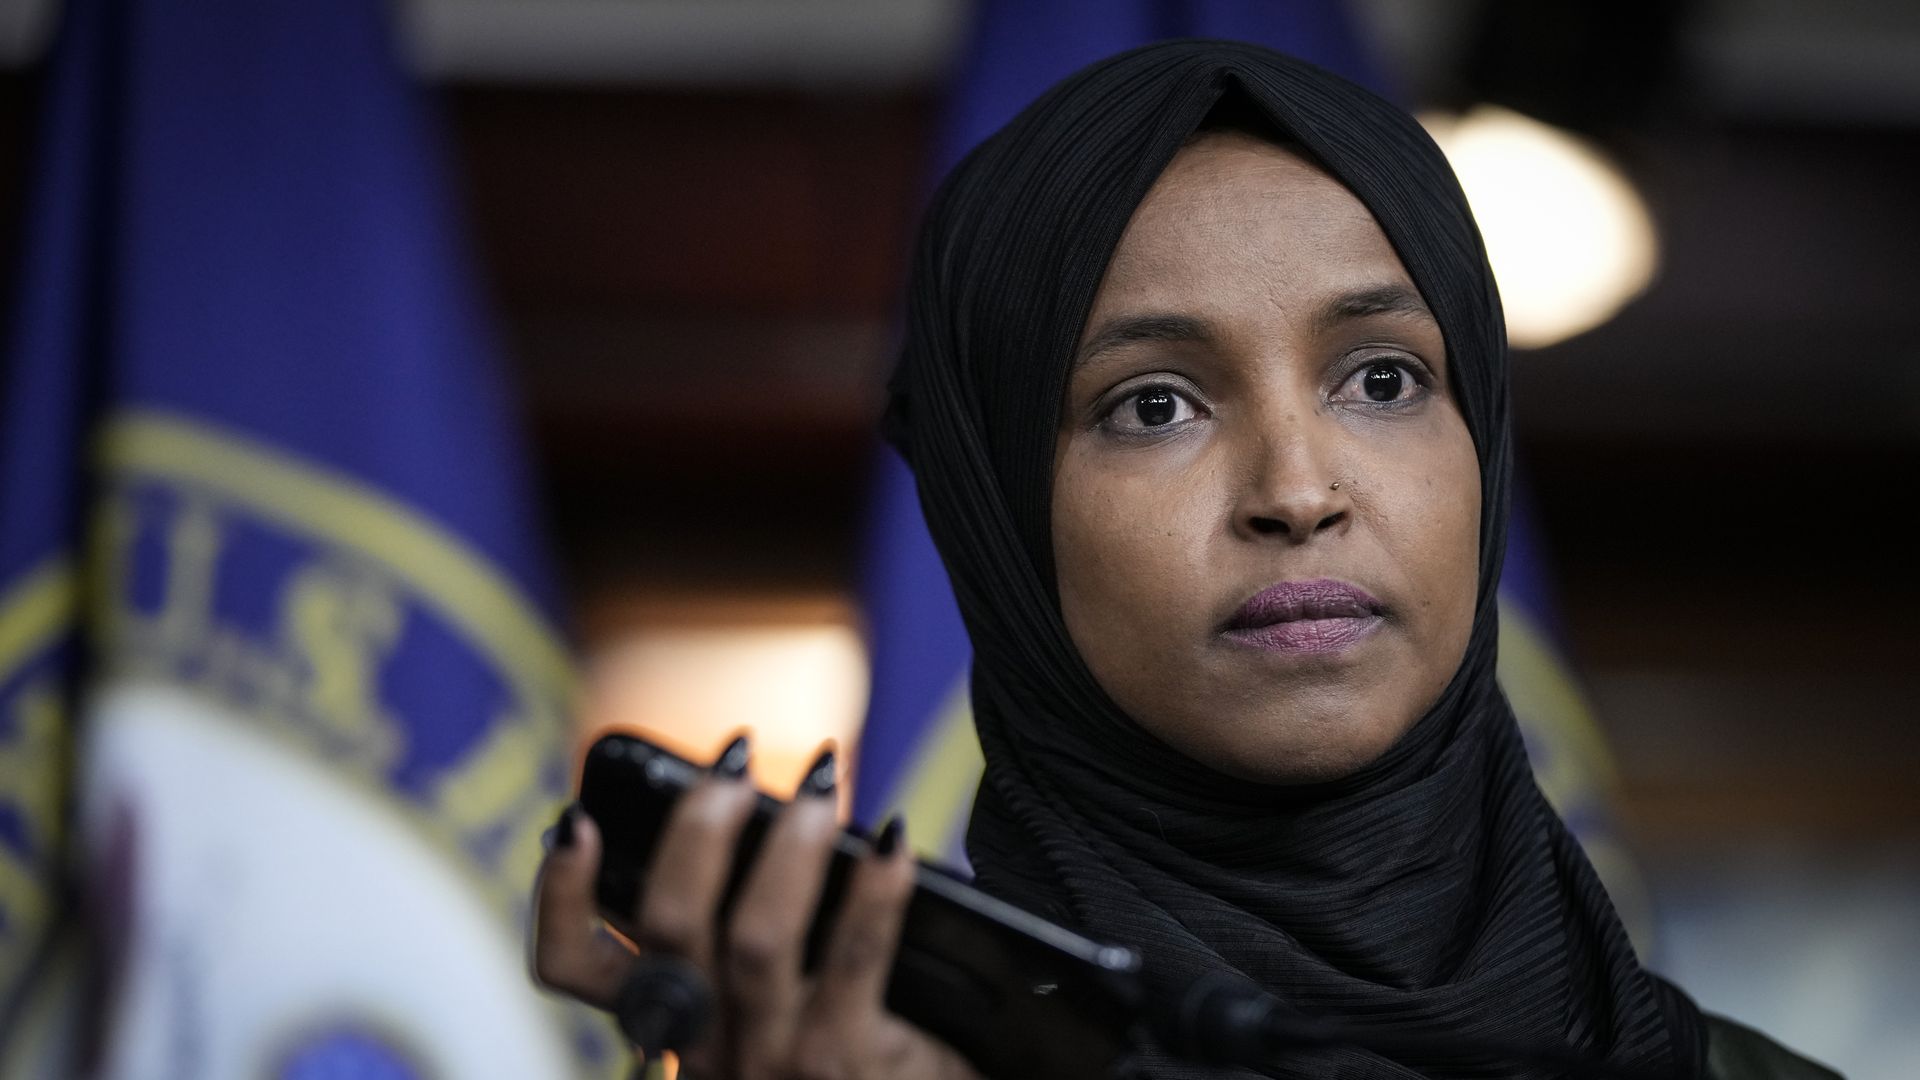 Rep. Ilhan Omar is seen holding a tape recorder as it plays a death threat made against her.